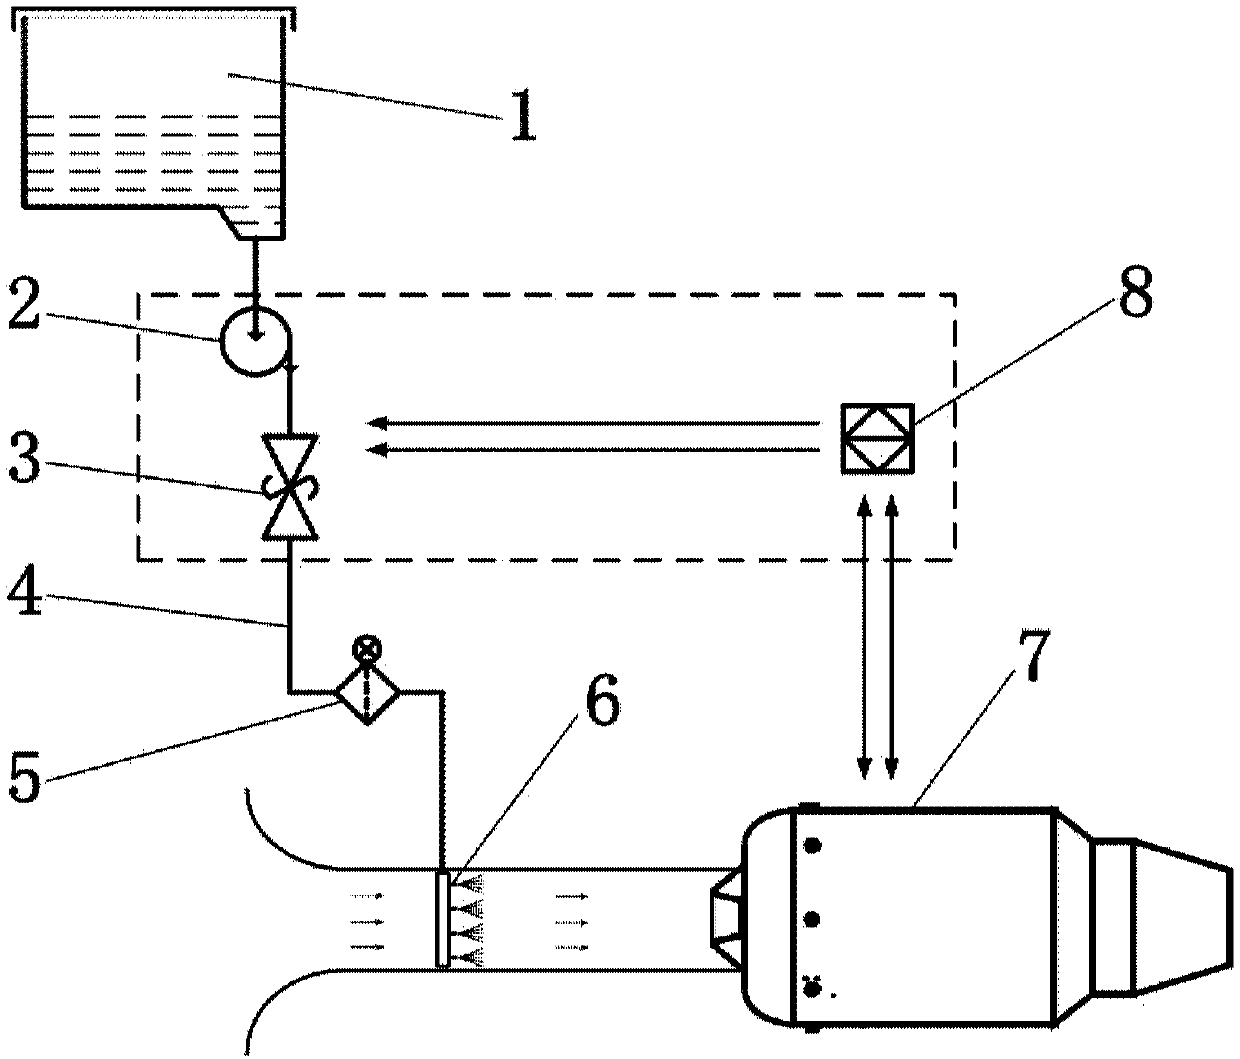 Water or methyl alcohol spraying thrust increasing system suitable for small turbojet engine